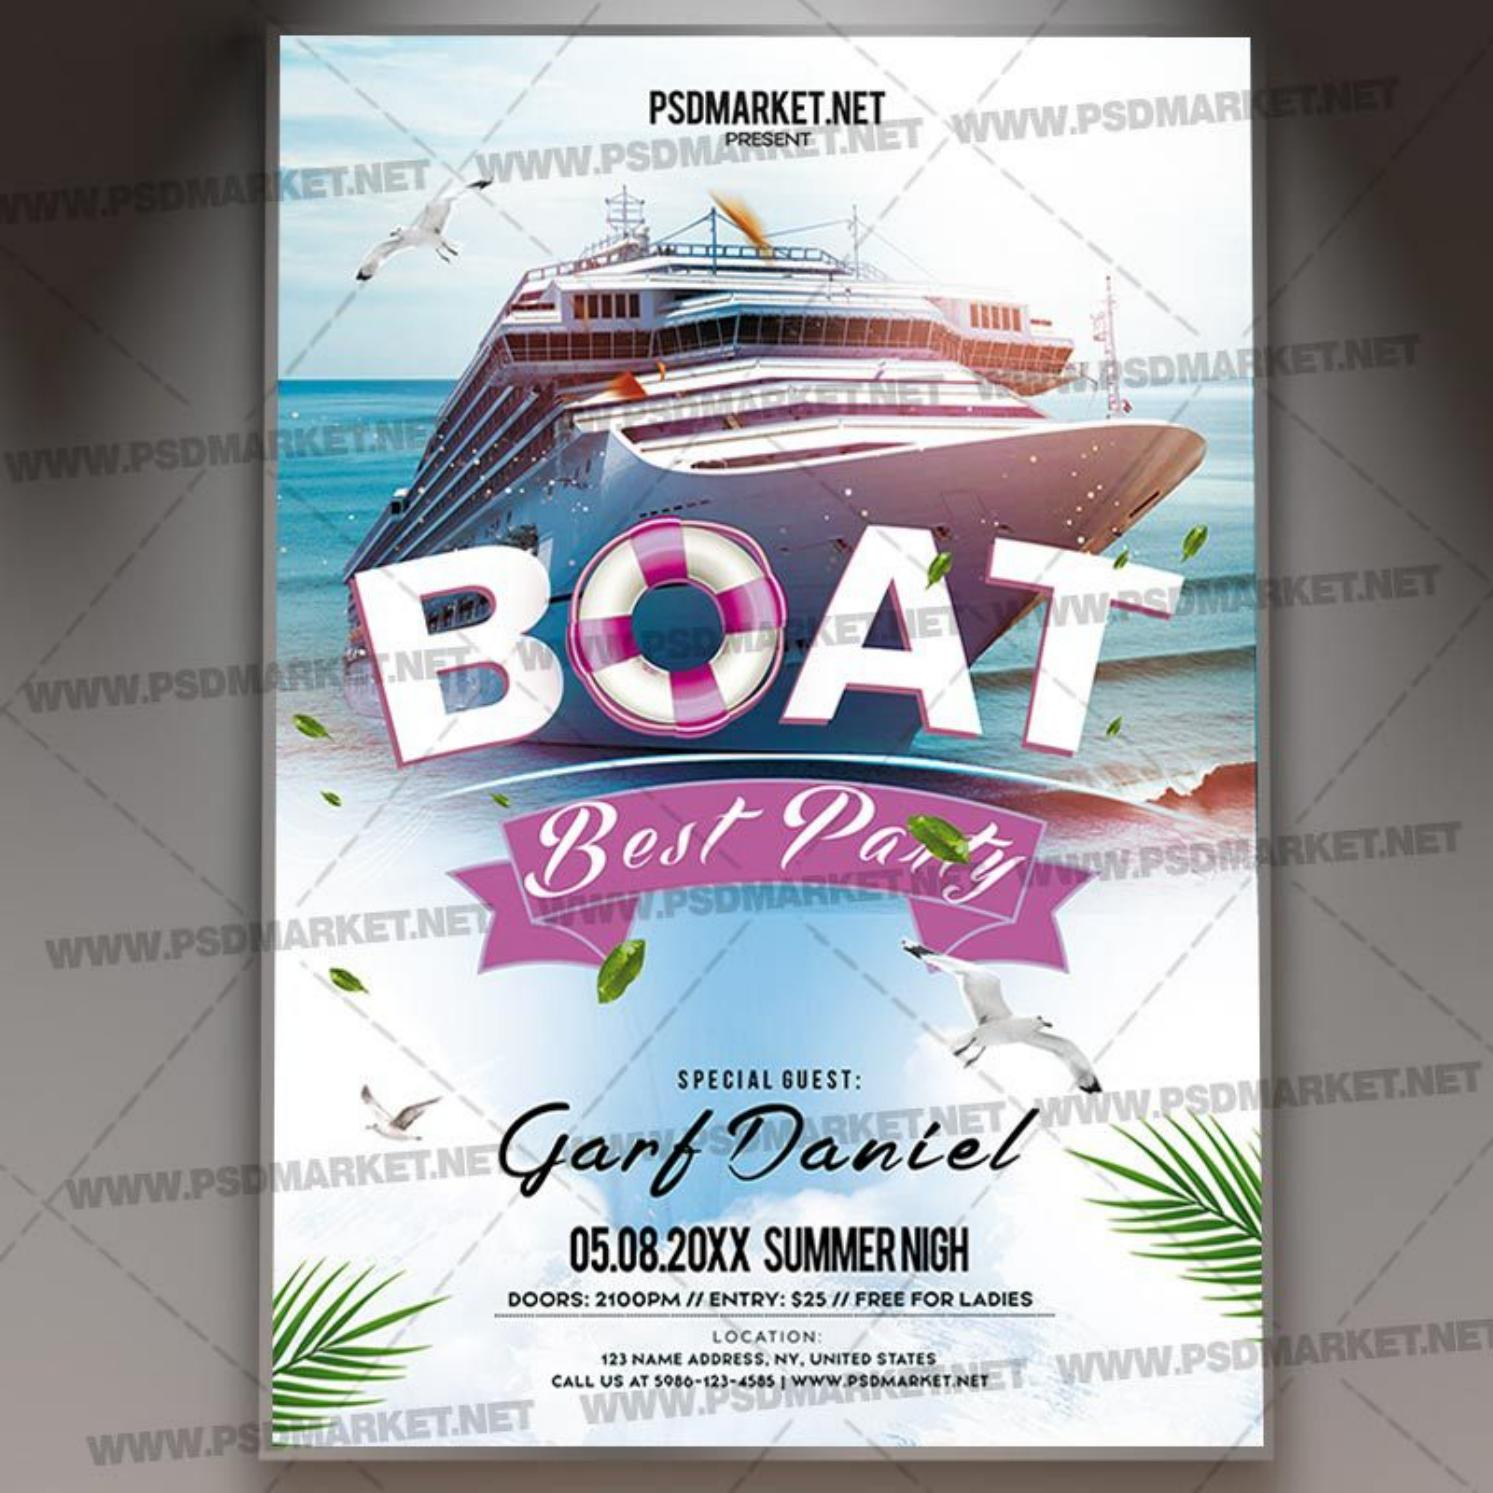 Boat Party Night Flyer - PSD Template by PSDmarket - issuu In Boat Cruise Flyer Template For Boat Cruise Flyer Template